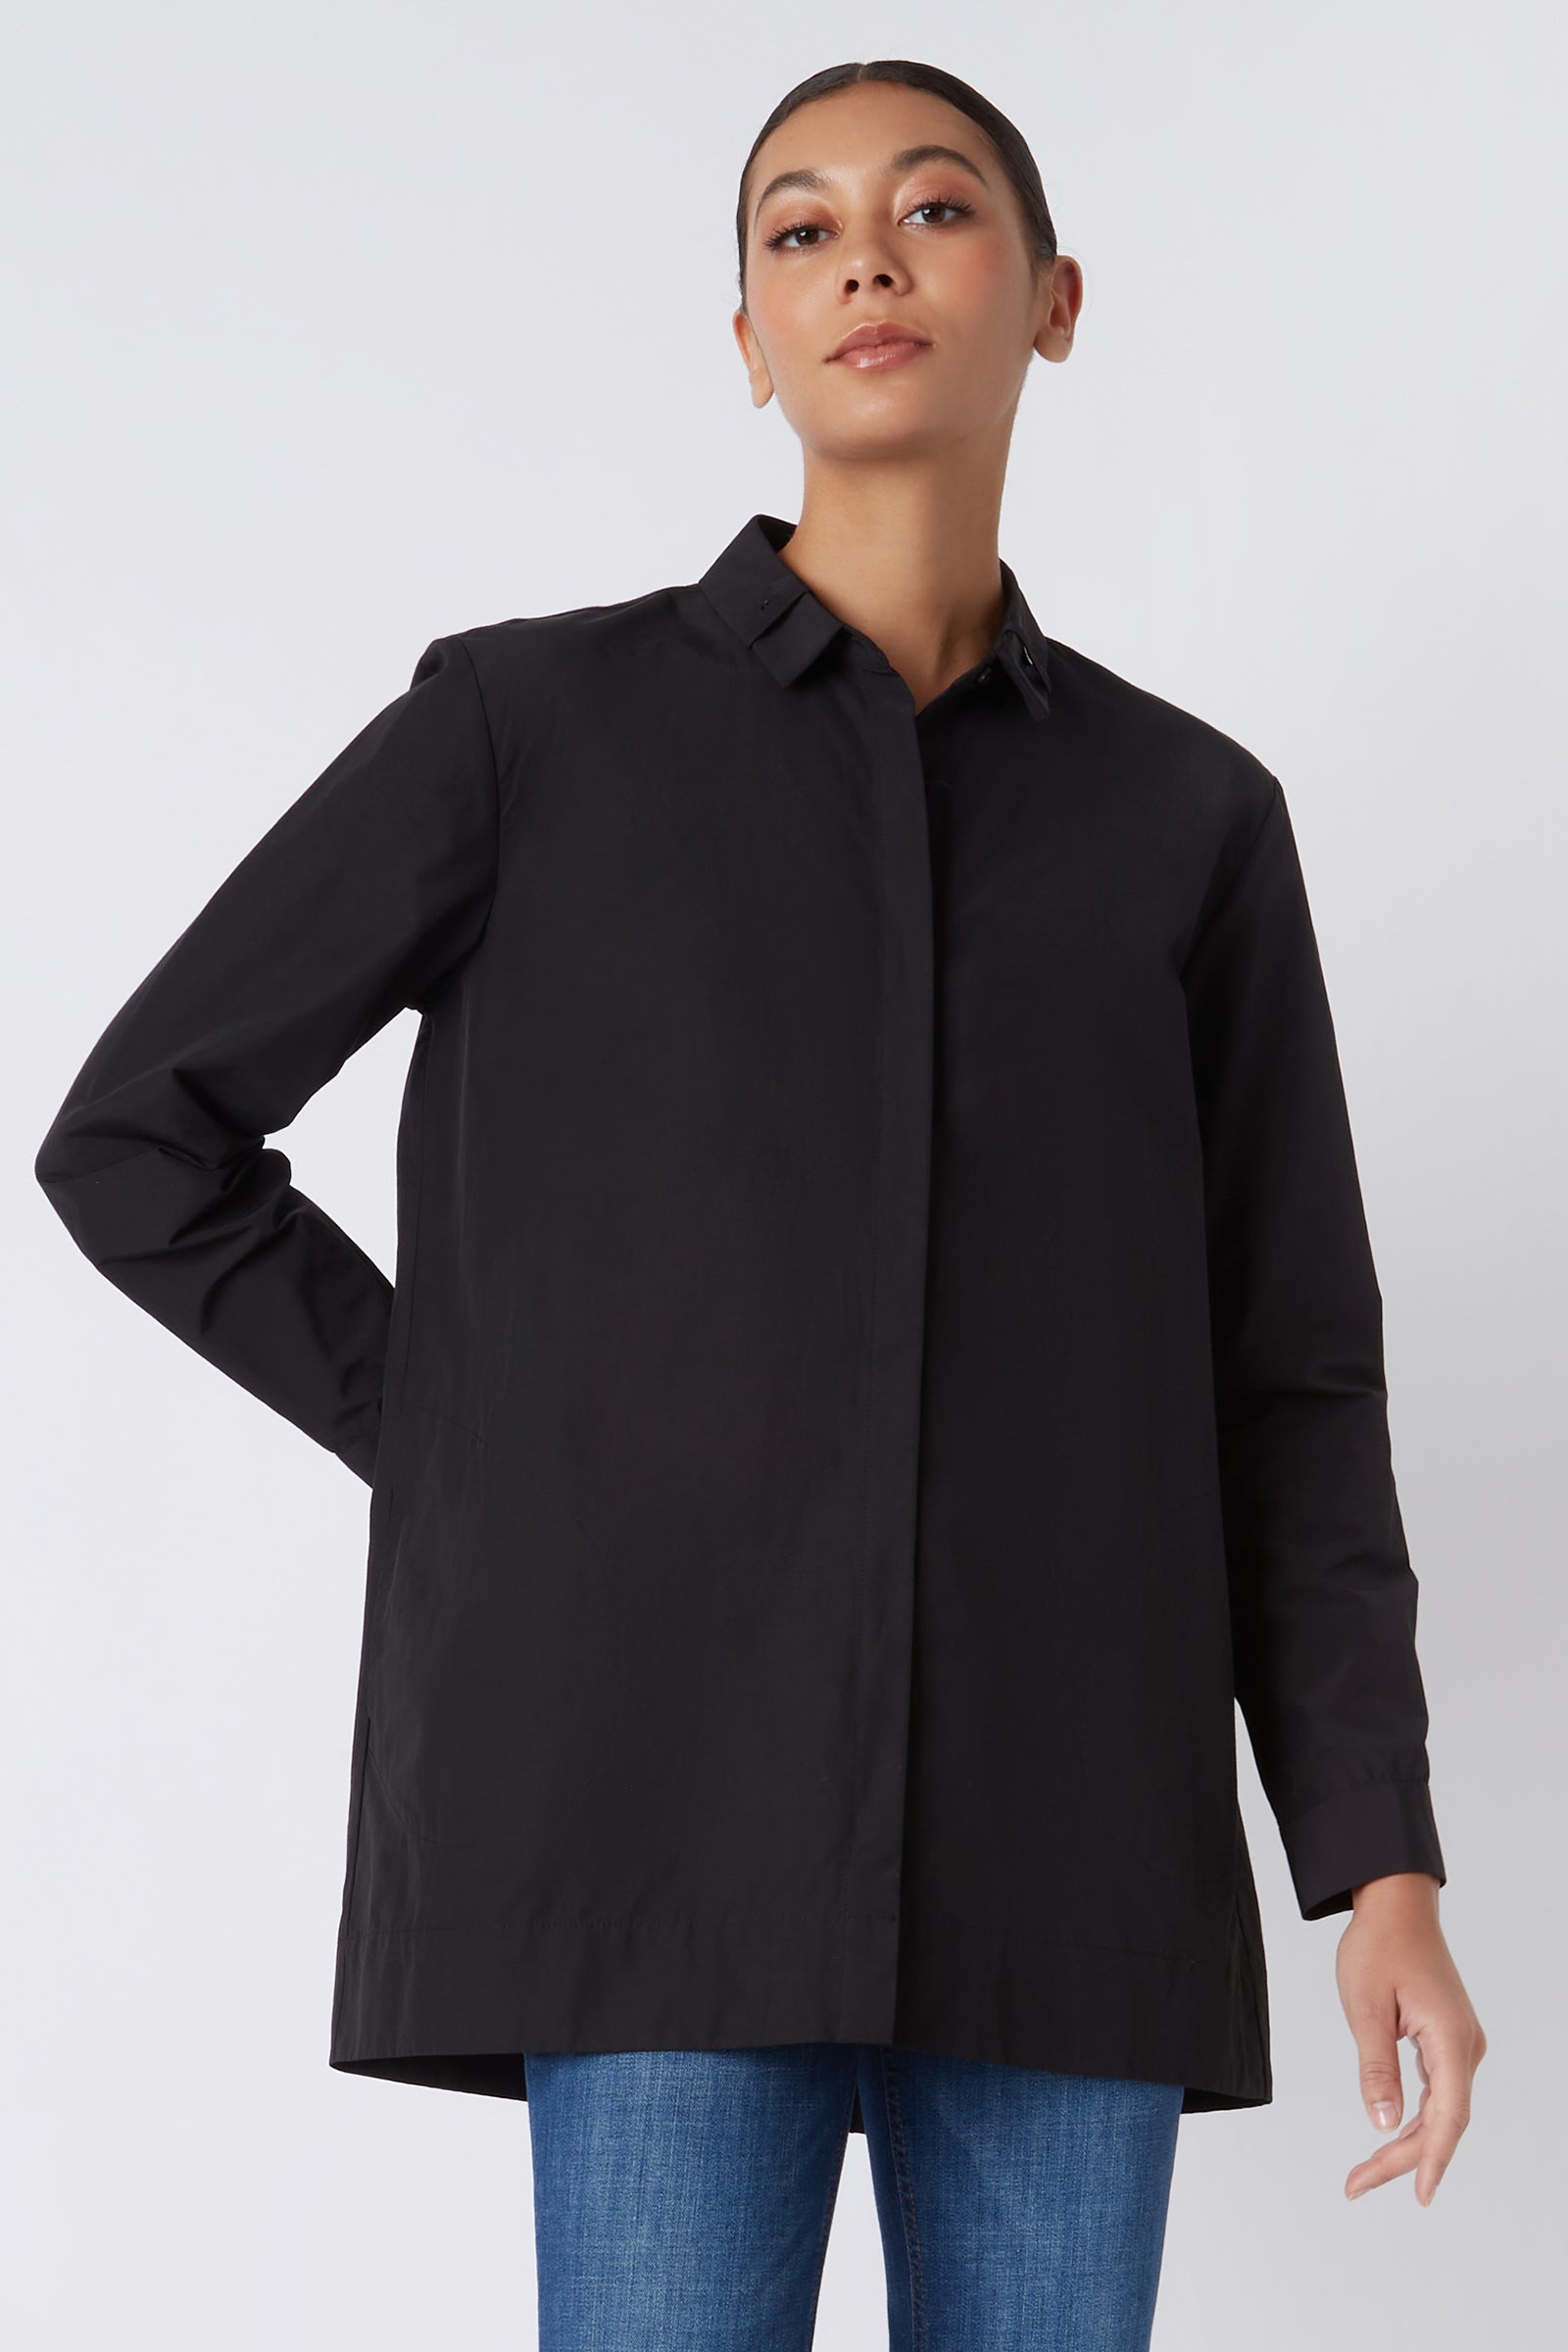 Kal Rieman Lori Tab Collar Tunic in Black on Model with Hand Behind Back Cropped Front View